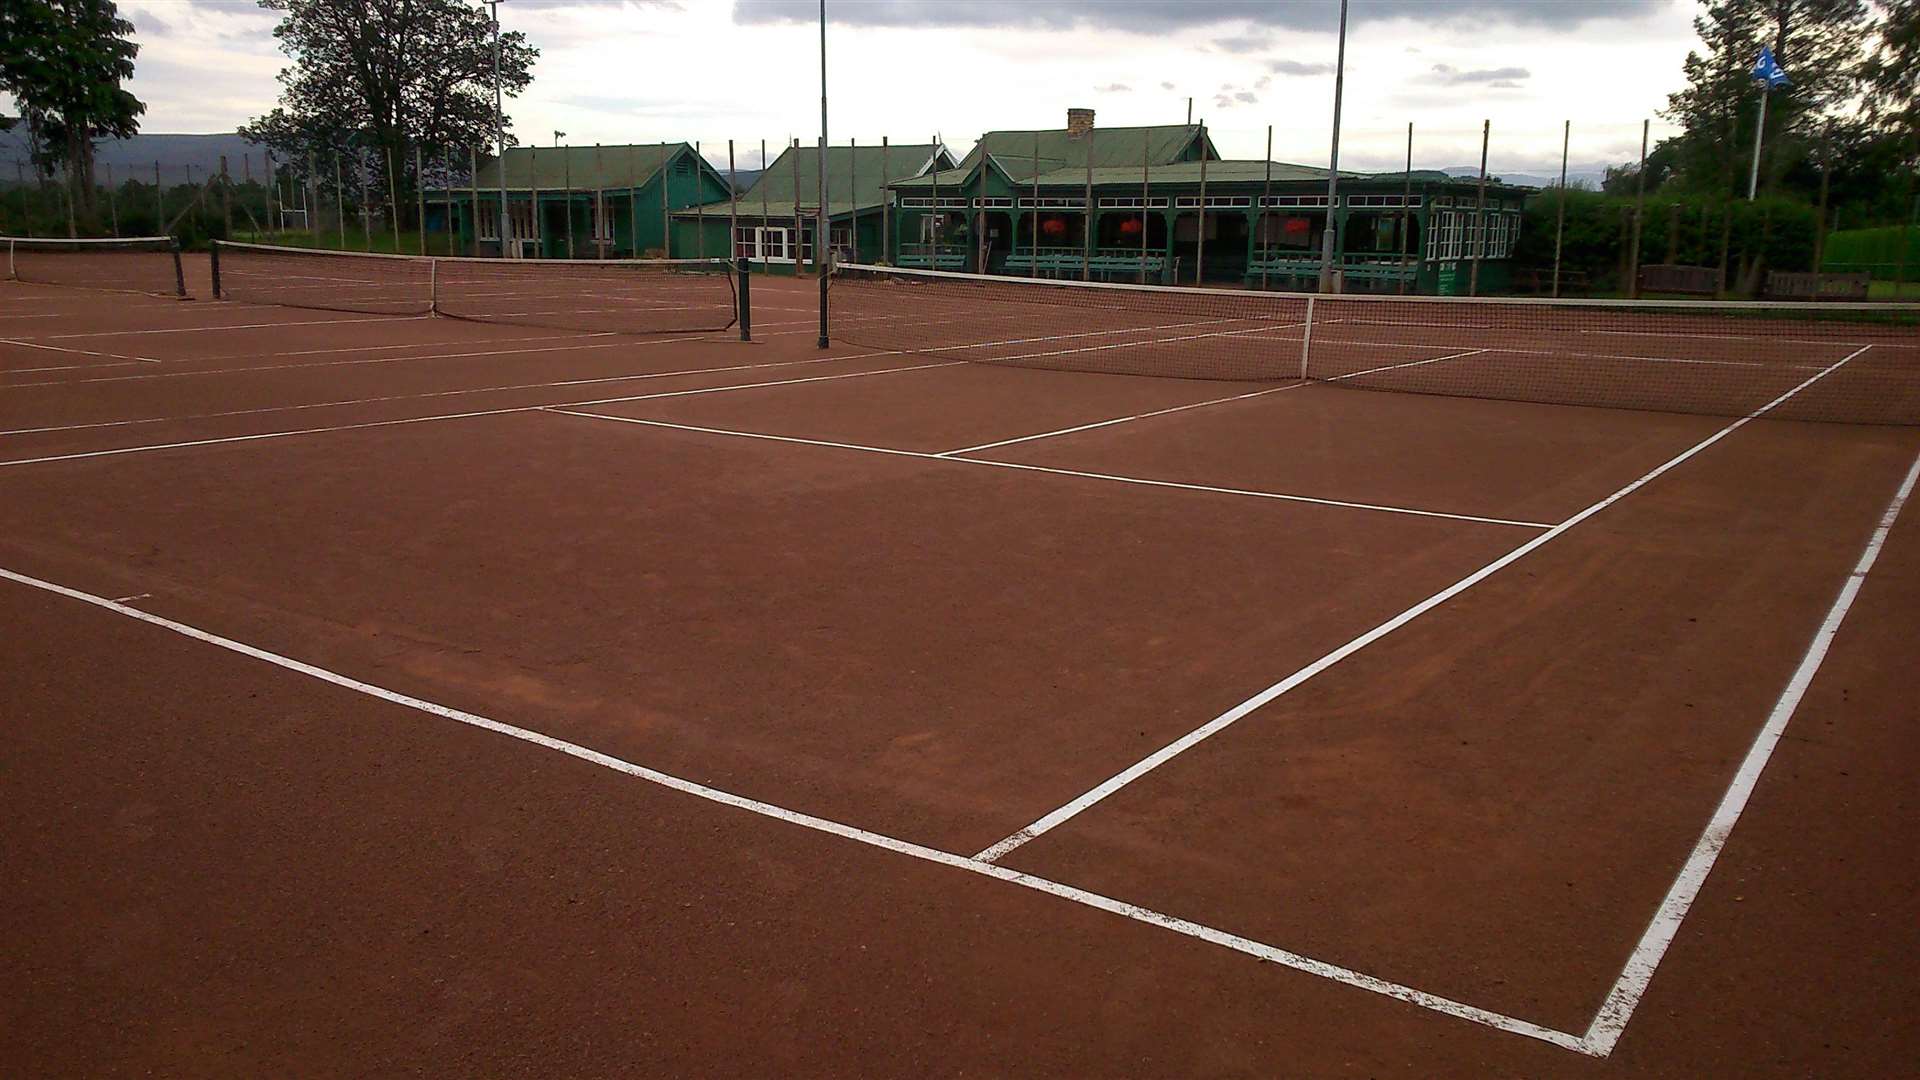 New clay surfaces and lines have improved the courts at Grantown Tennis Club.